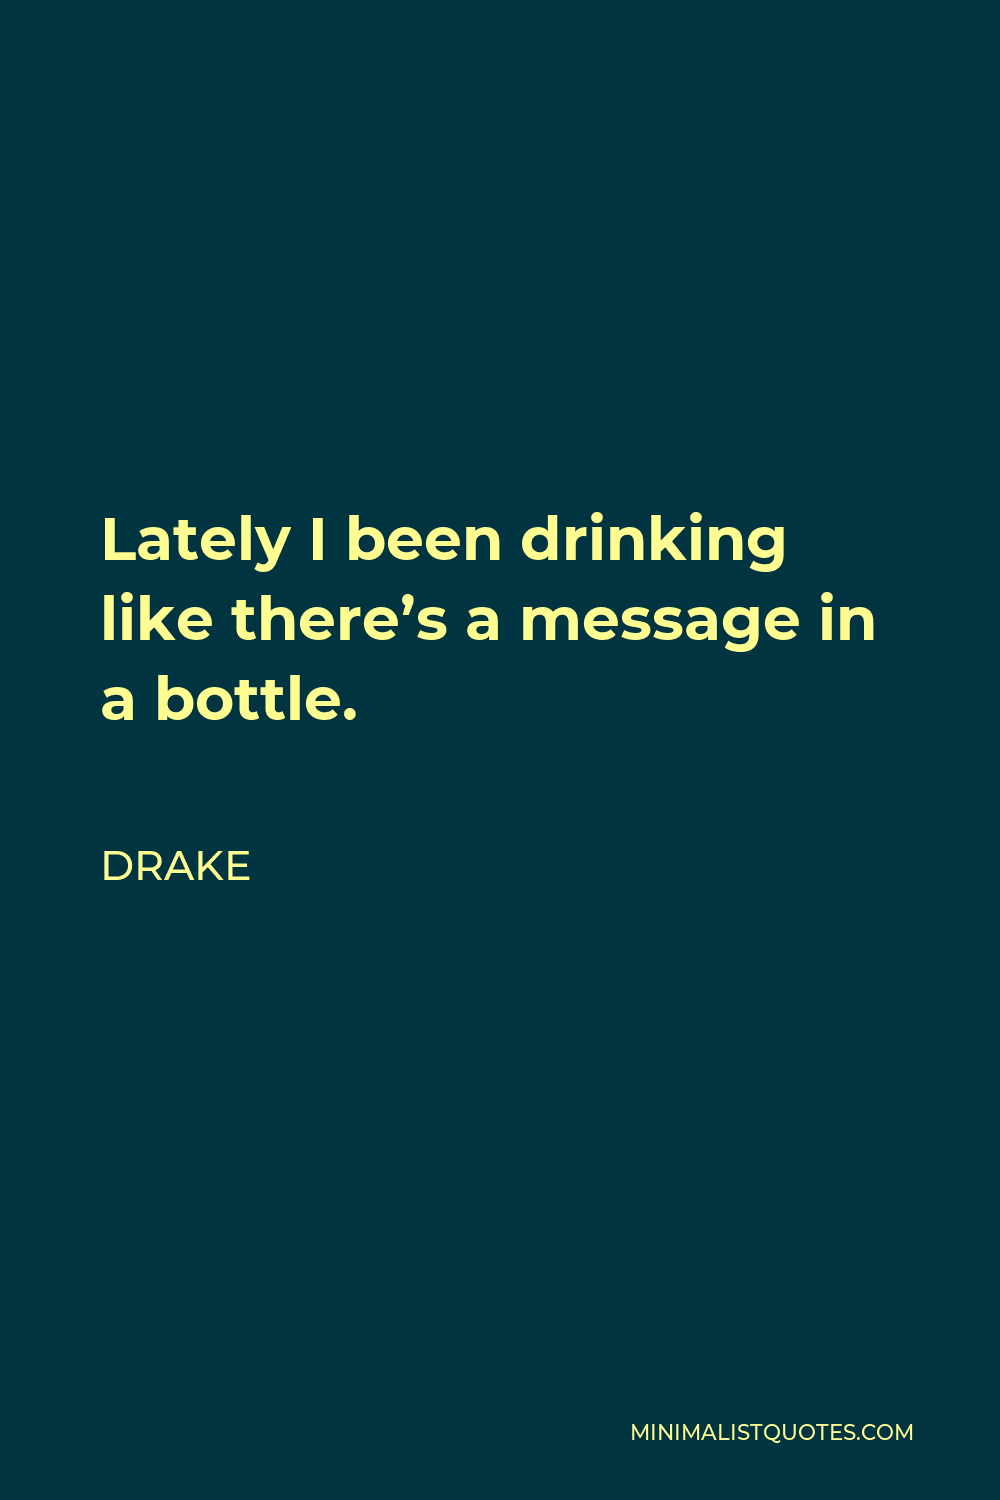 Drake Quote - Lately I been drinking like there’s a message in a bottle.